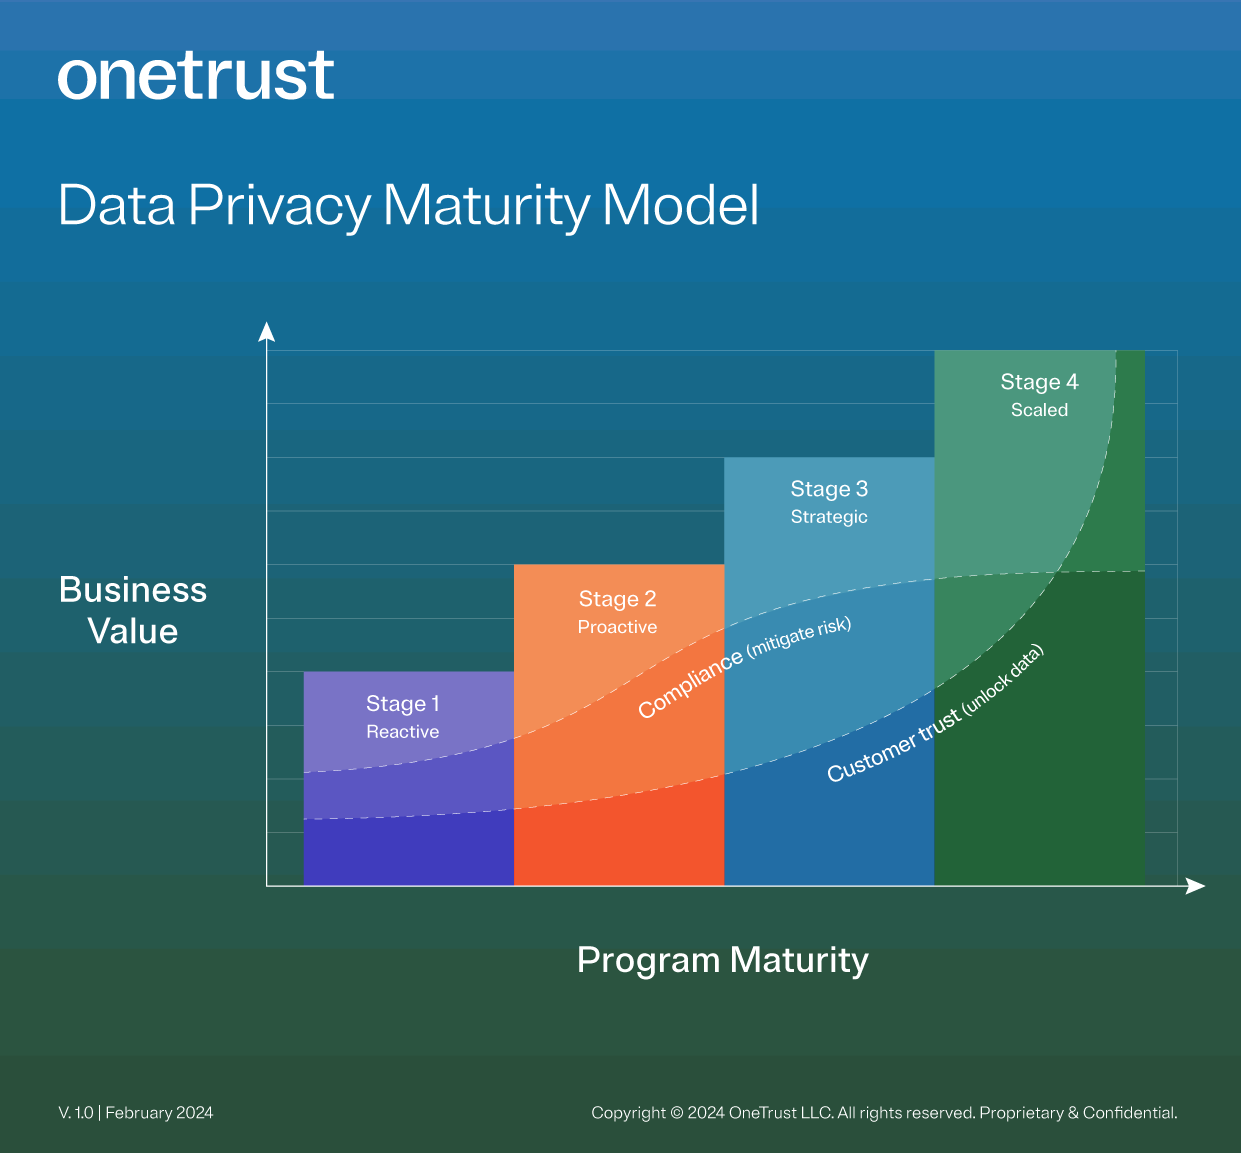 Bar graph showing the relationship between the maturity stages of a data privacy program and their business value.